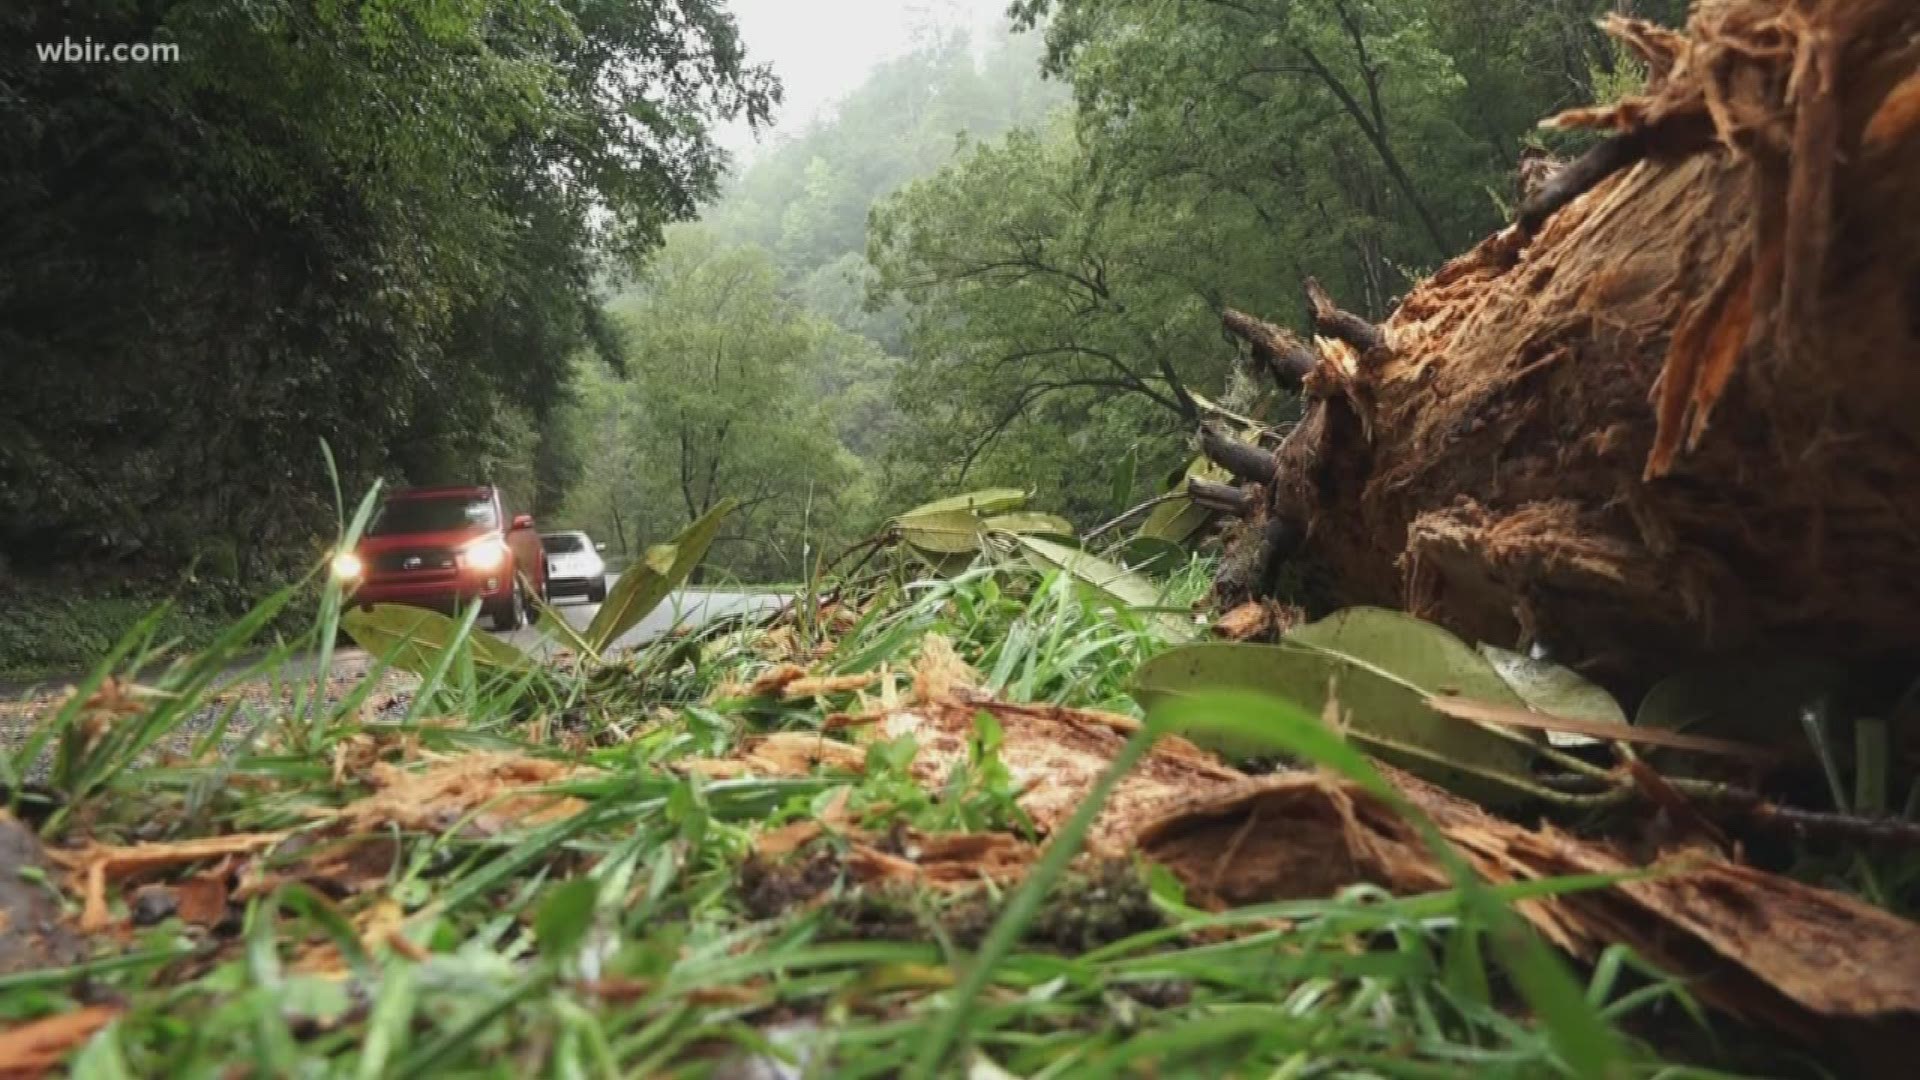 East Tennessee didn't get as much rain as expected, and the winds weren't nearly as high as feared. There was some minor damage in the Smokies, but the park reopened on Monday.